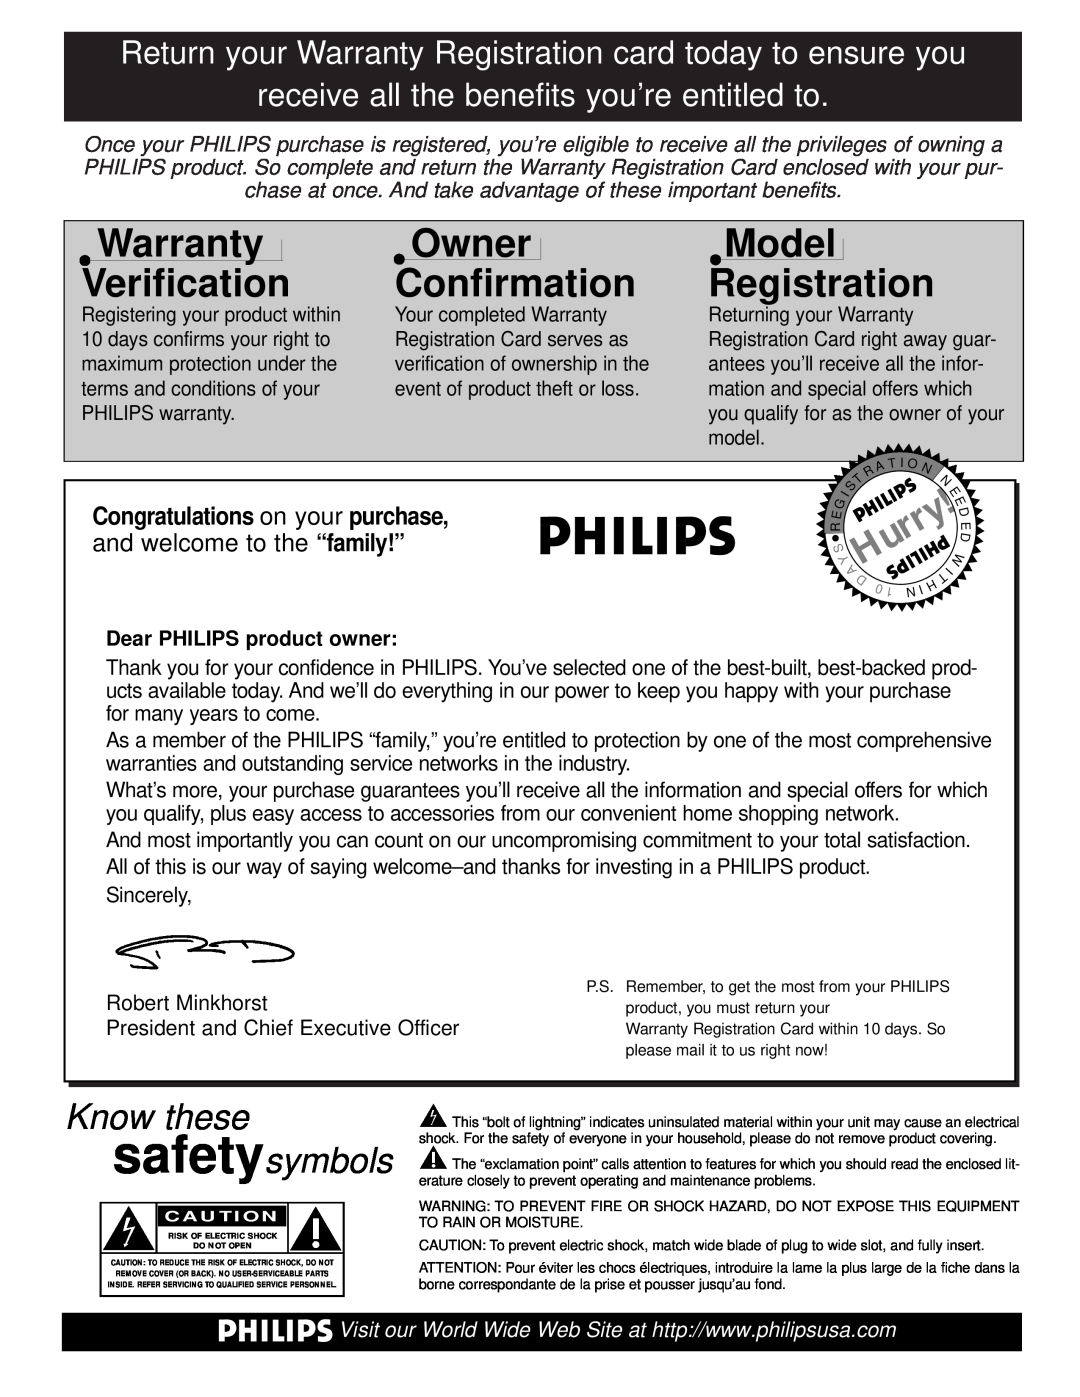 Philips 27PT71B1 Congratulations on your purchase, and welcome to the “family!”, Warranty Verification, Owner Confirmation 